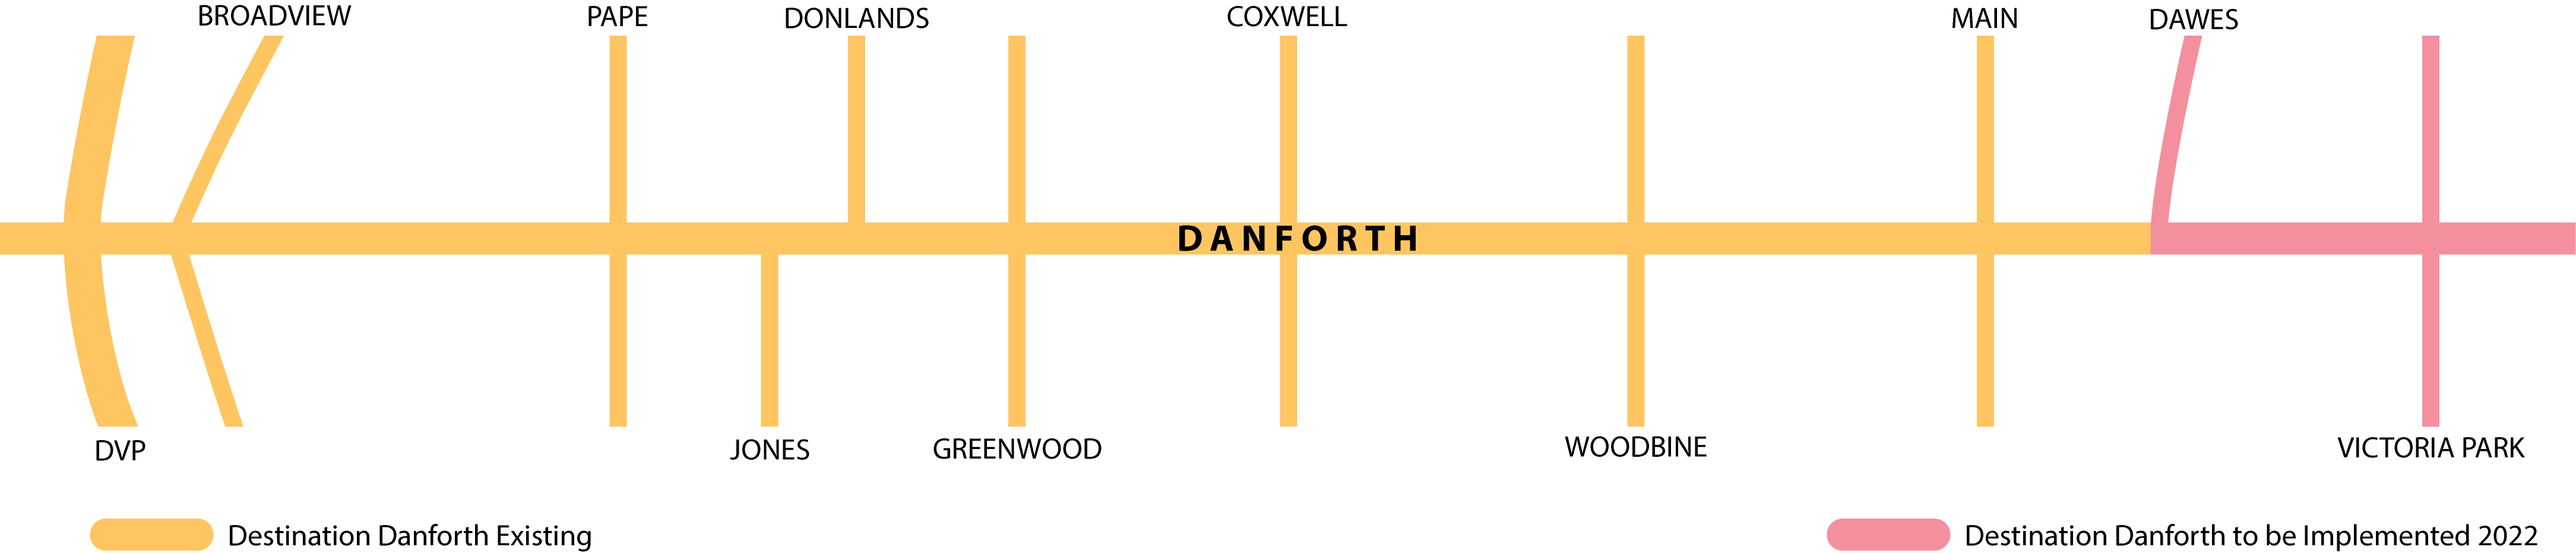 Map of Danforth Avenue Complete Streets project area from the DVP to Victoria Park Avenue. The eastern section of the project area from Dawes Road to east of Victoria Park Ave is the Destination Danforth area to be implemented in 2022.